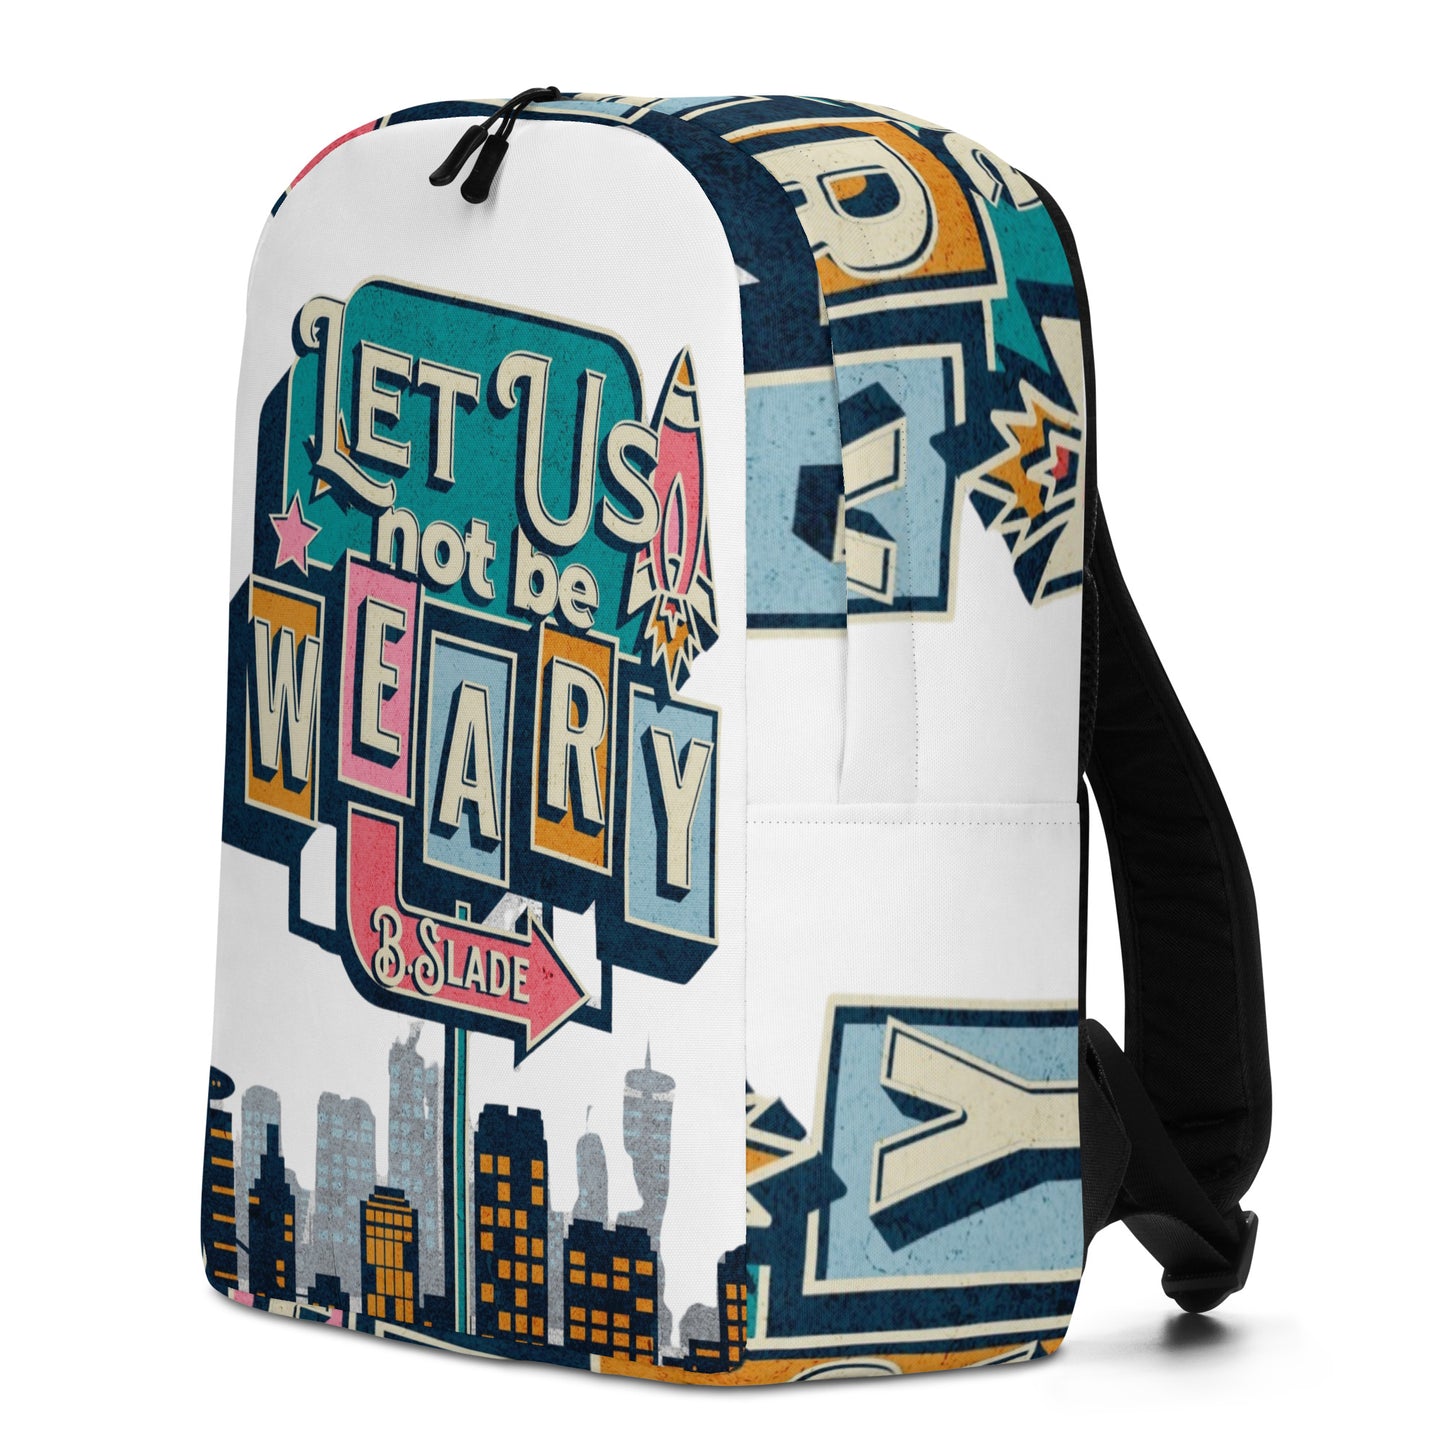 PLUSH BOY LET US NOT BE WEARY BACKPACK